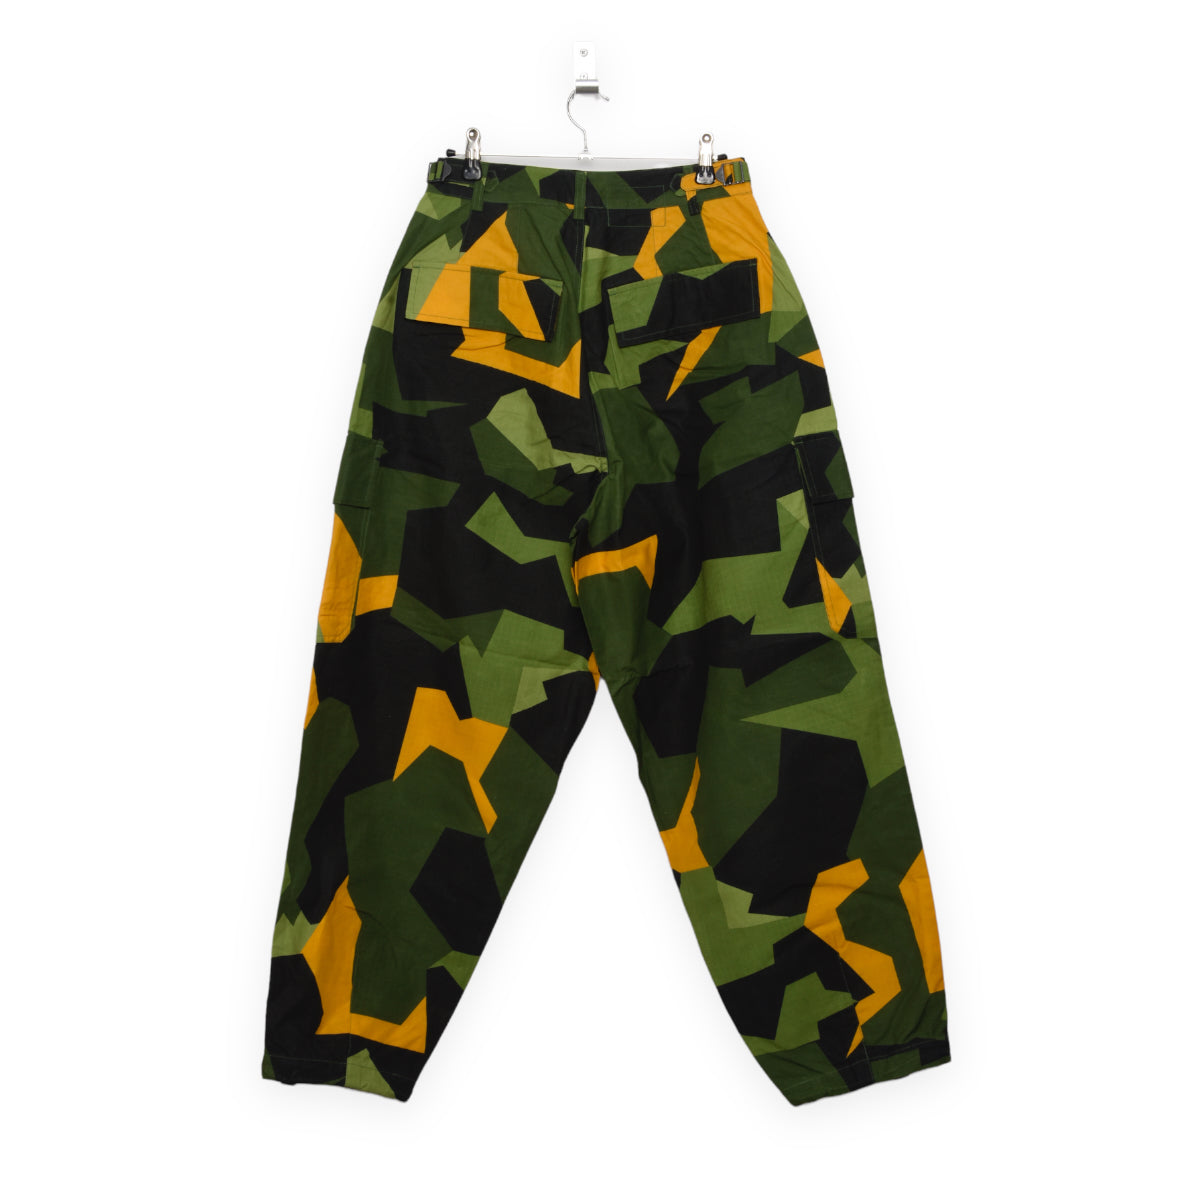 Camo Pants for sale in Mississauga Ontario  Facebook Marketplace   Facebook